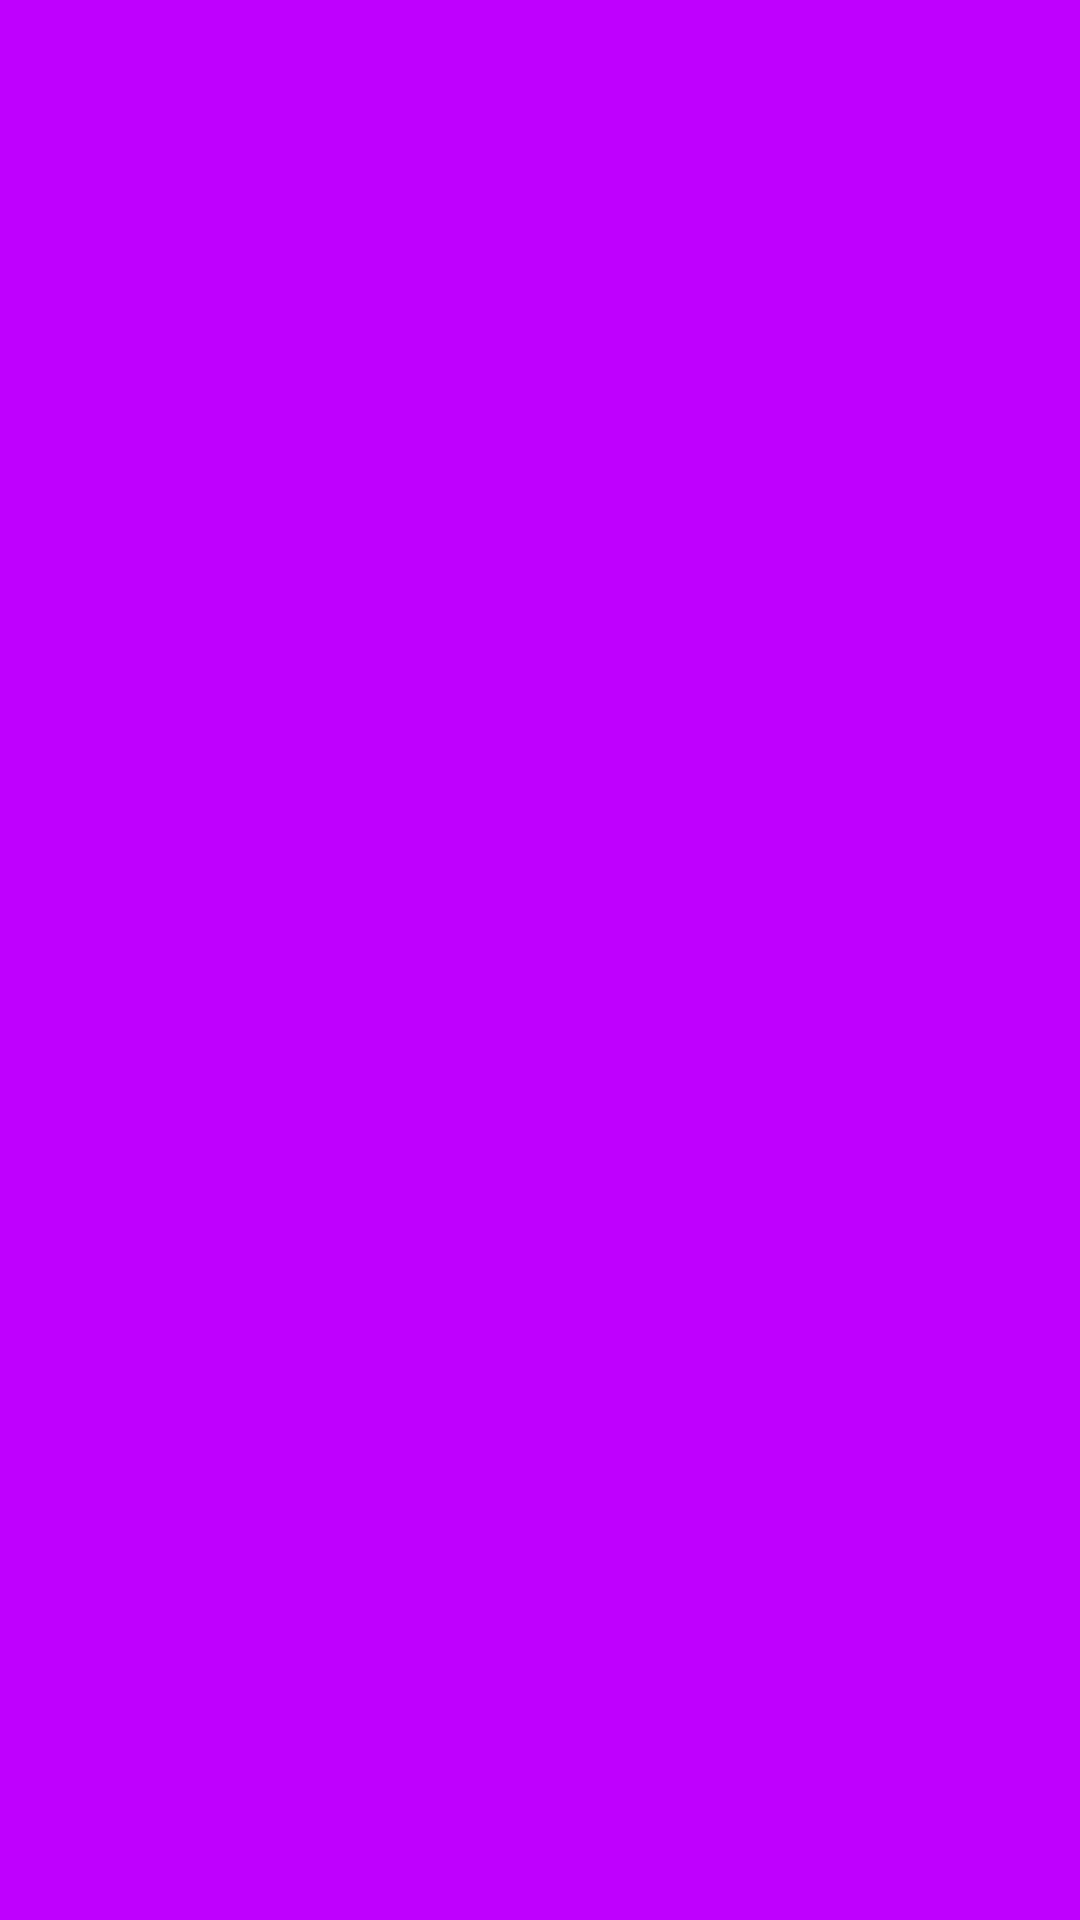 Solid Purple Wallpaper For iPhone resolution 1080x1920